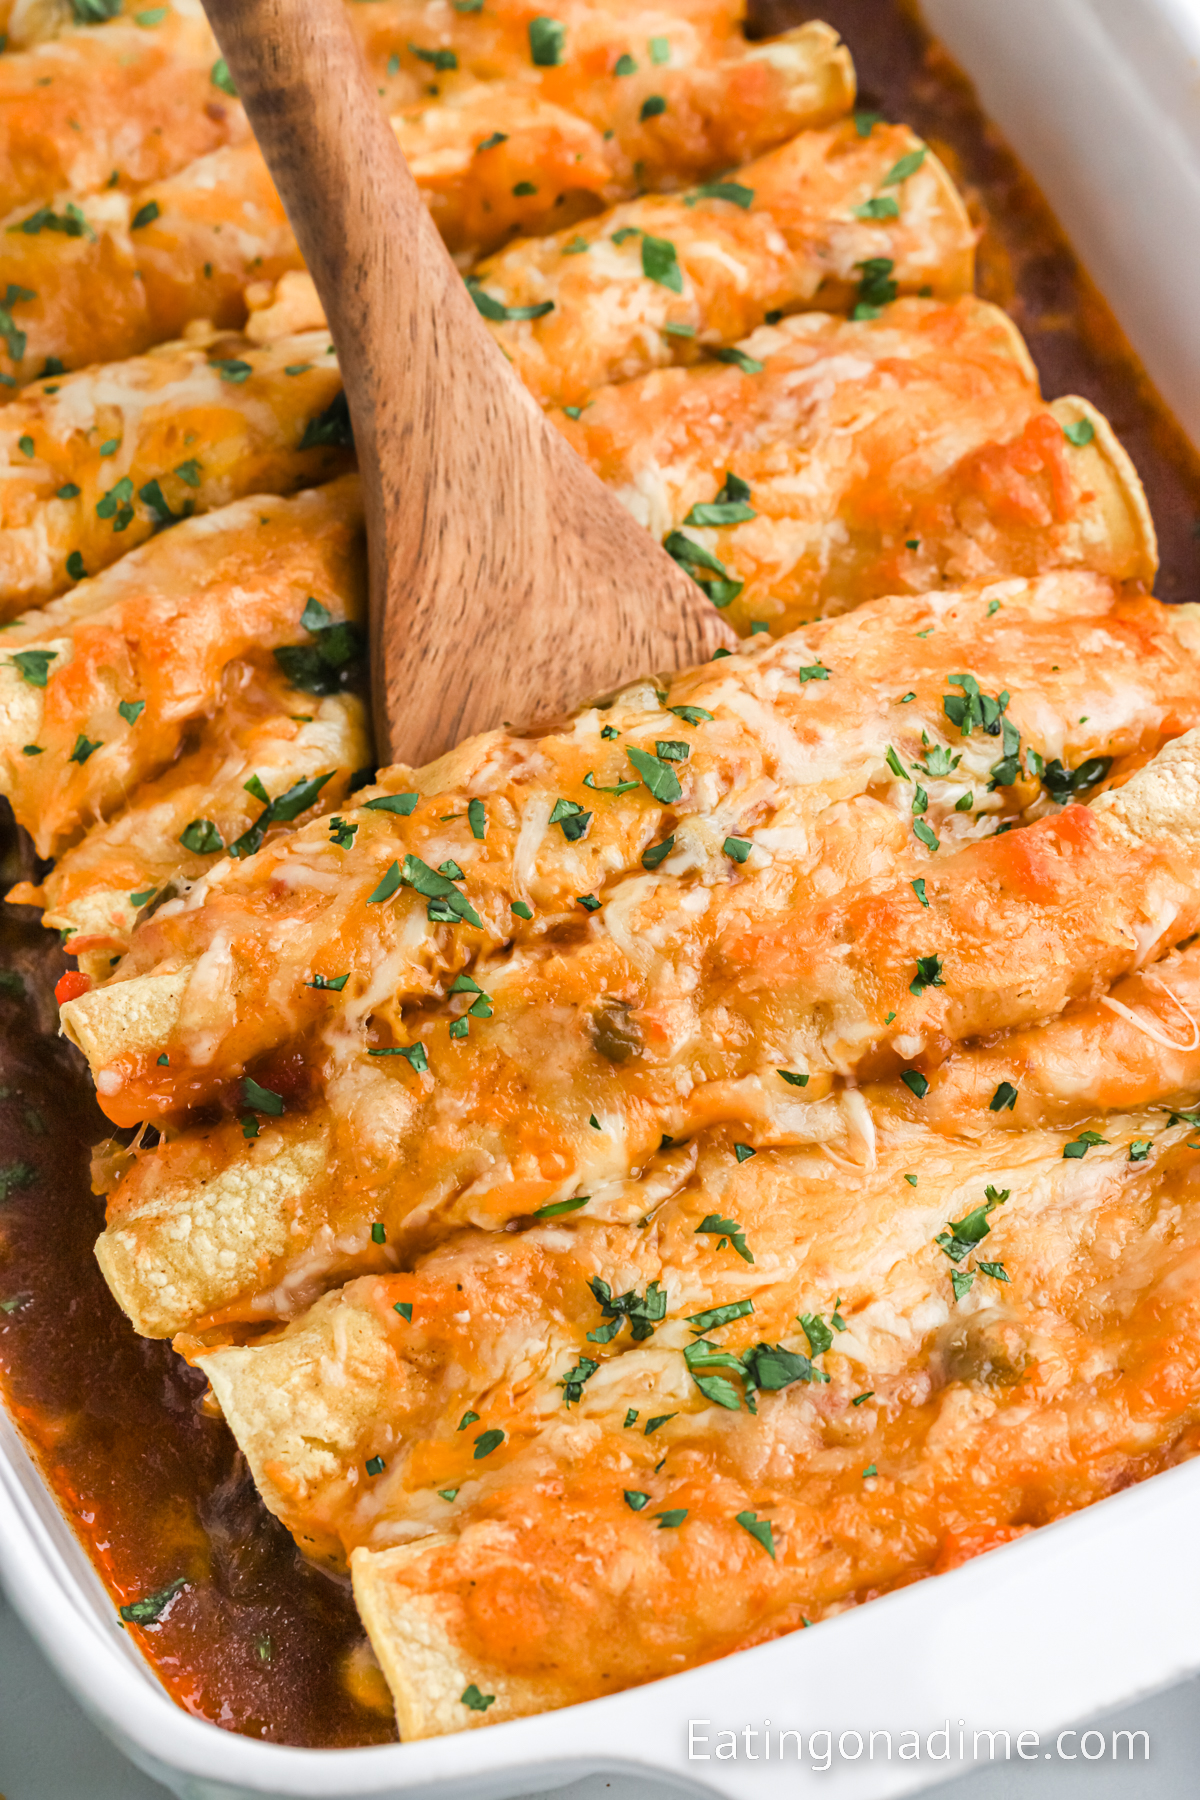 Shredded beef enchiladas in a baking dish with a wooden spoon